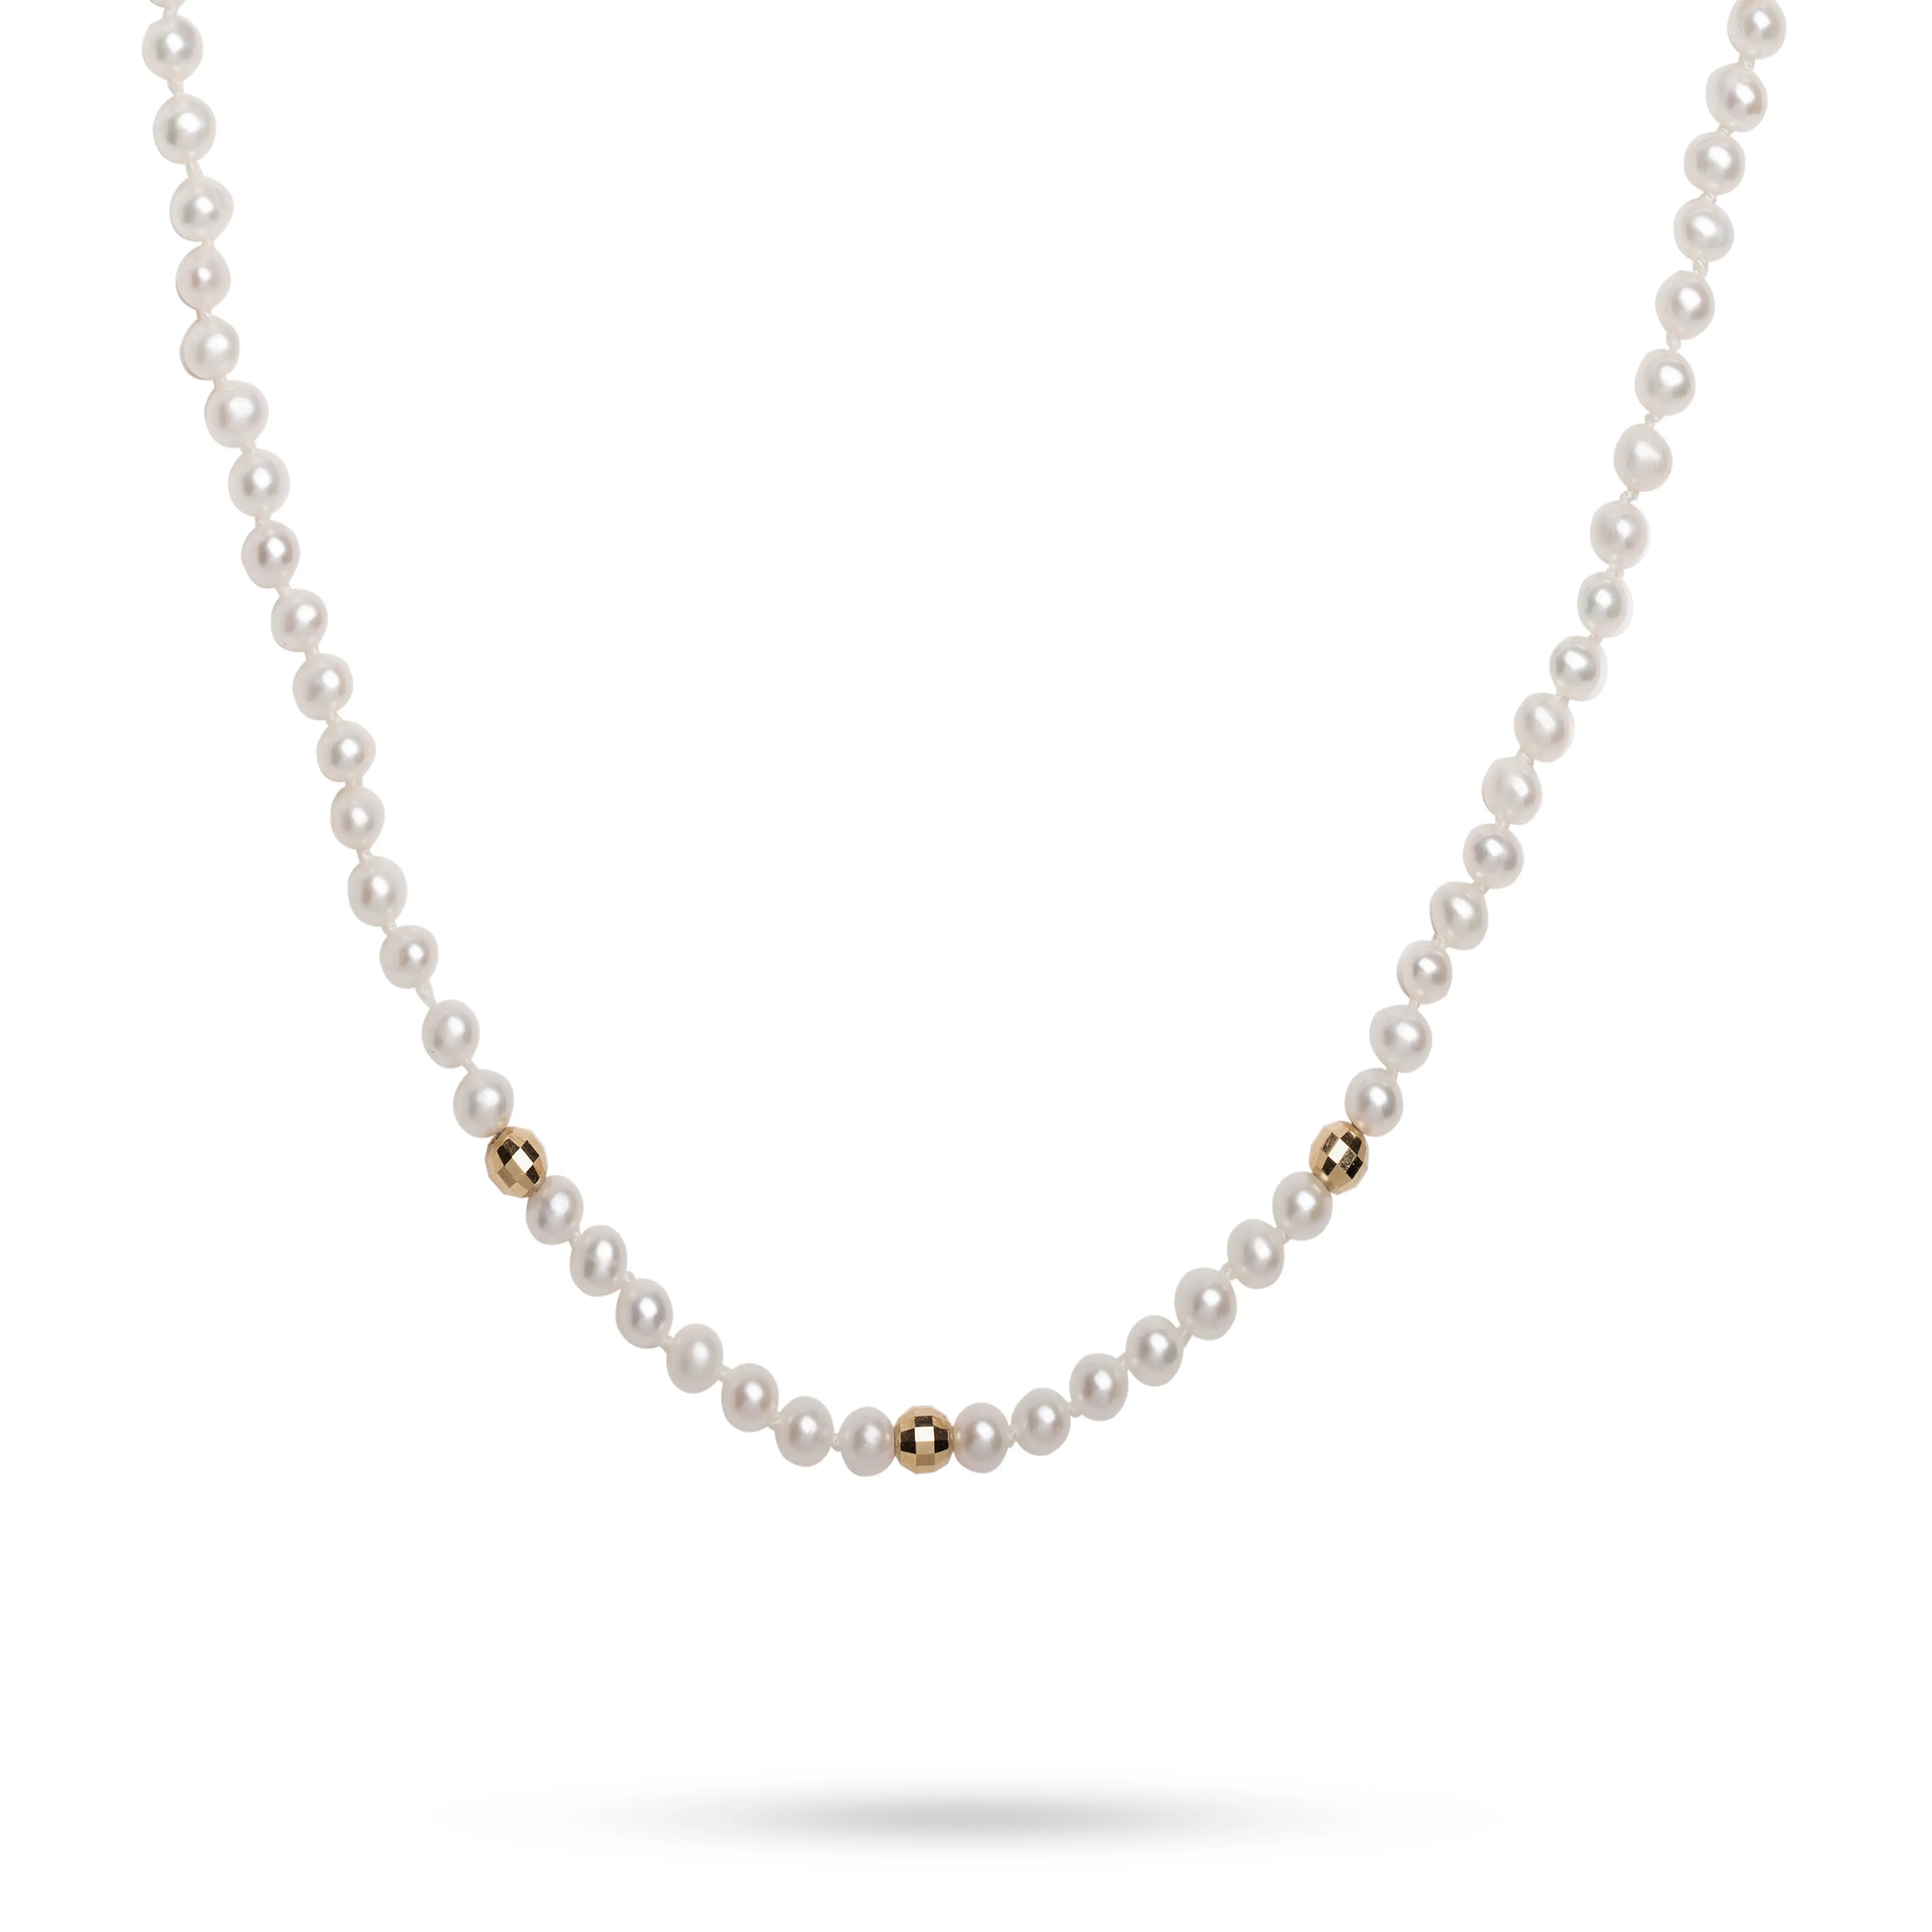 Pearl Necklace with 14K Gold Beads